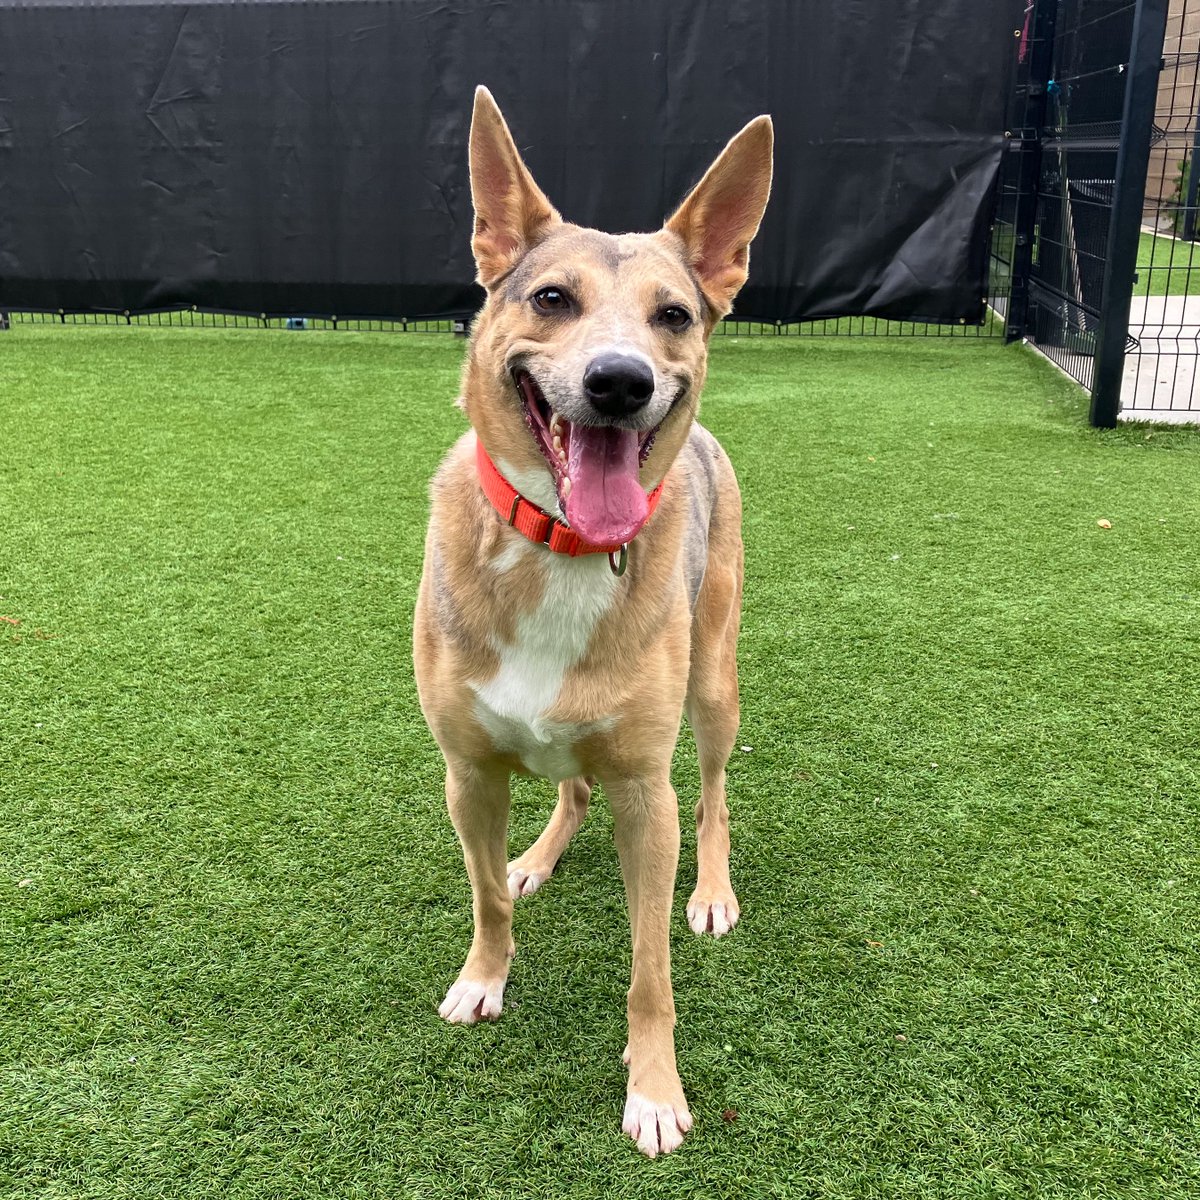 PET OF THE WEEK🐾Howdy there, partner! My name is Alma! I'm an energetic gal who enjoys a good run, playing fetch, and chasing after balls. If you're an active family ready for outdoor fun, I'm your perfect match! Call (714) 935-6848 and mention my Animal ID A1836614 to adopt me!